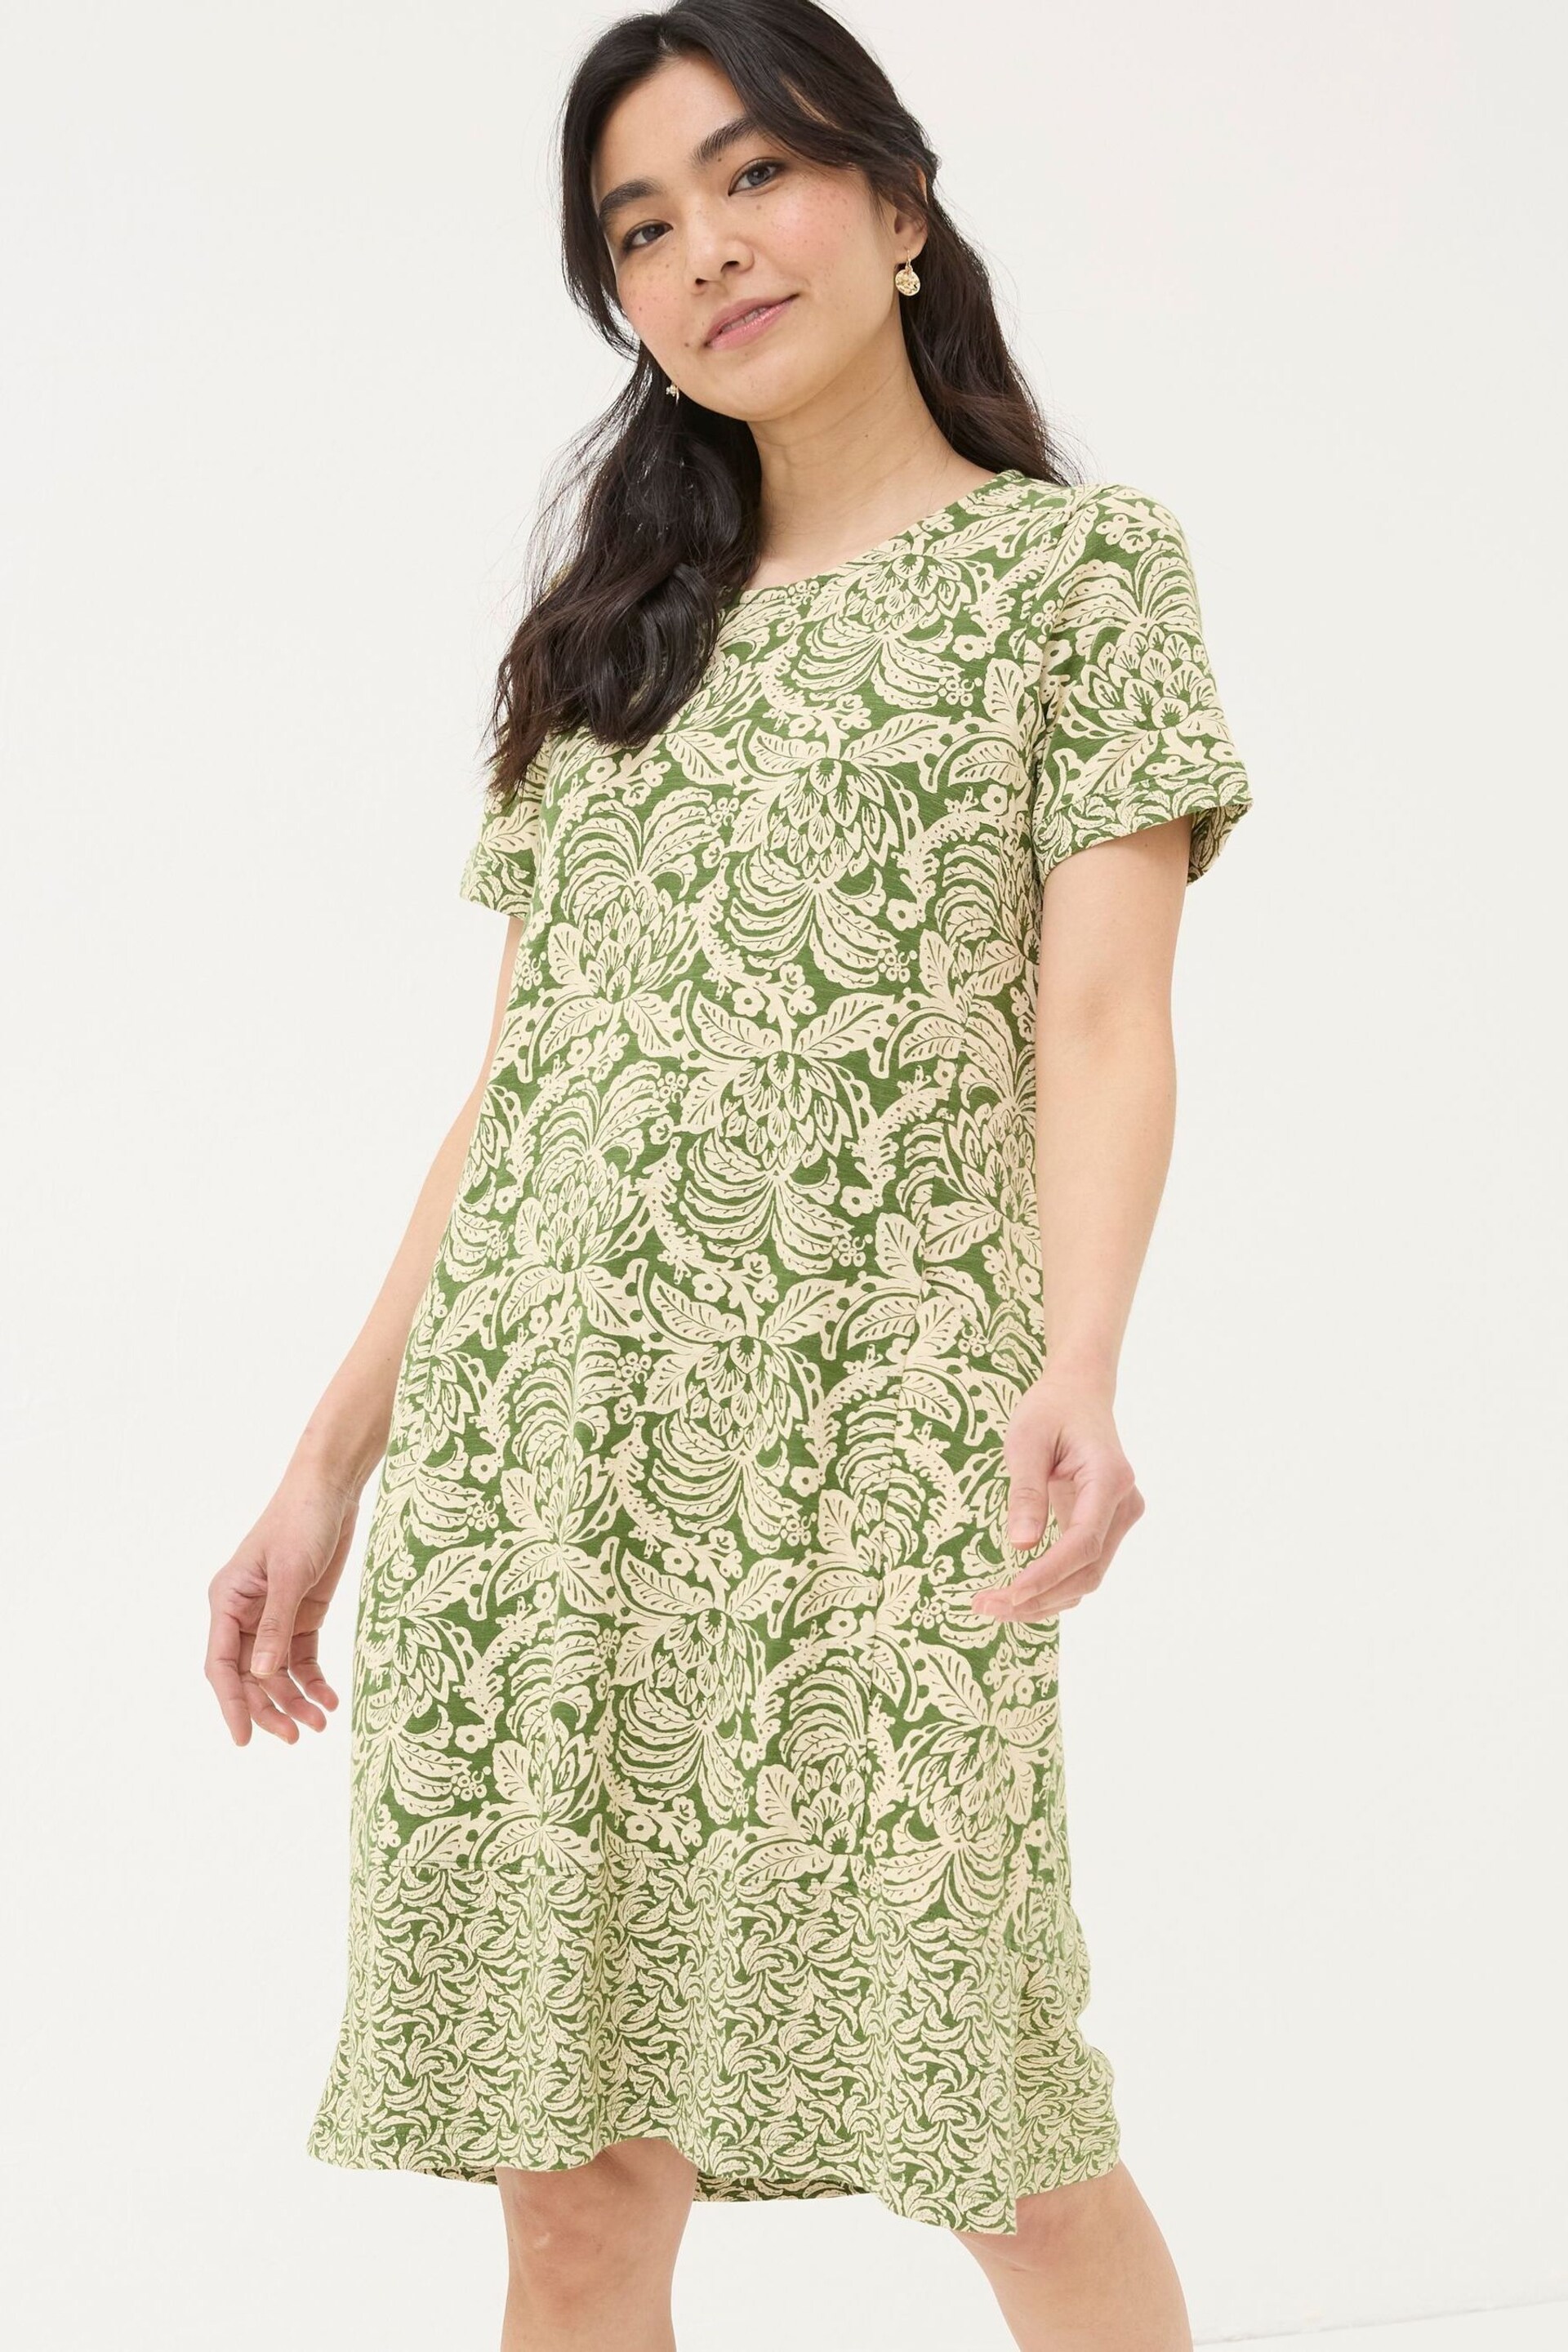 FatFace Green Simone Damask Floral Jersey Dress - Image 1 of 6